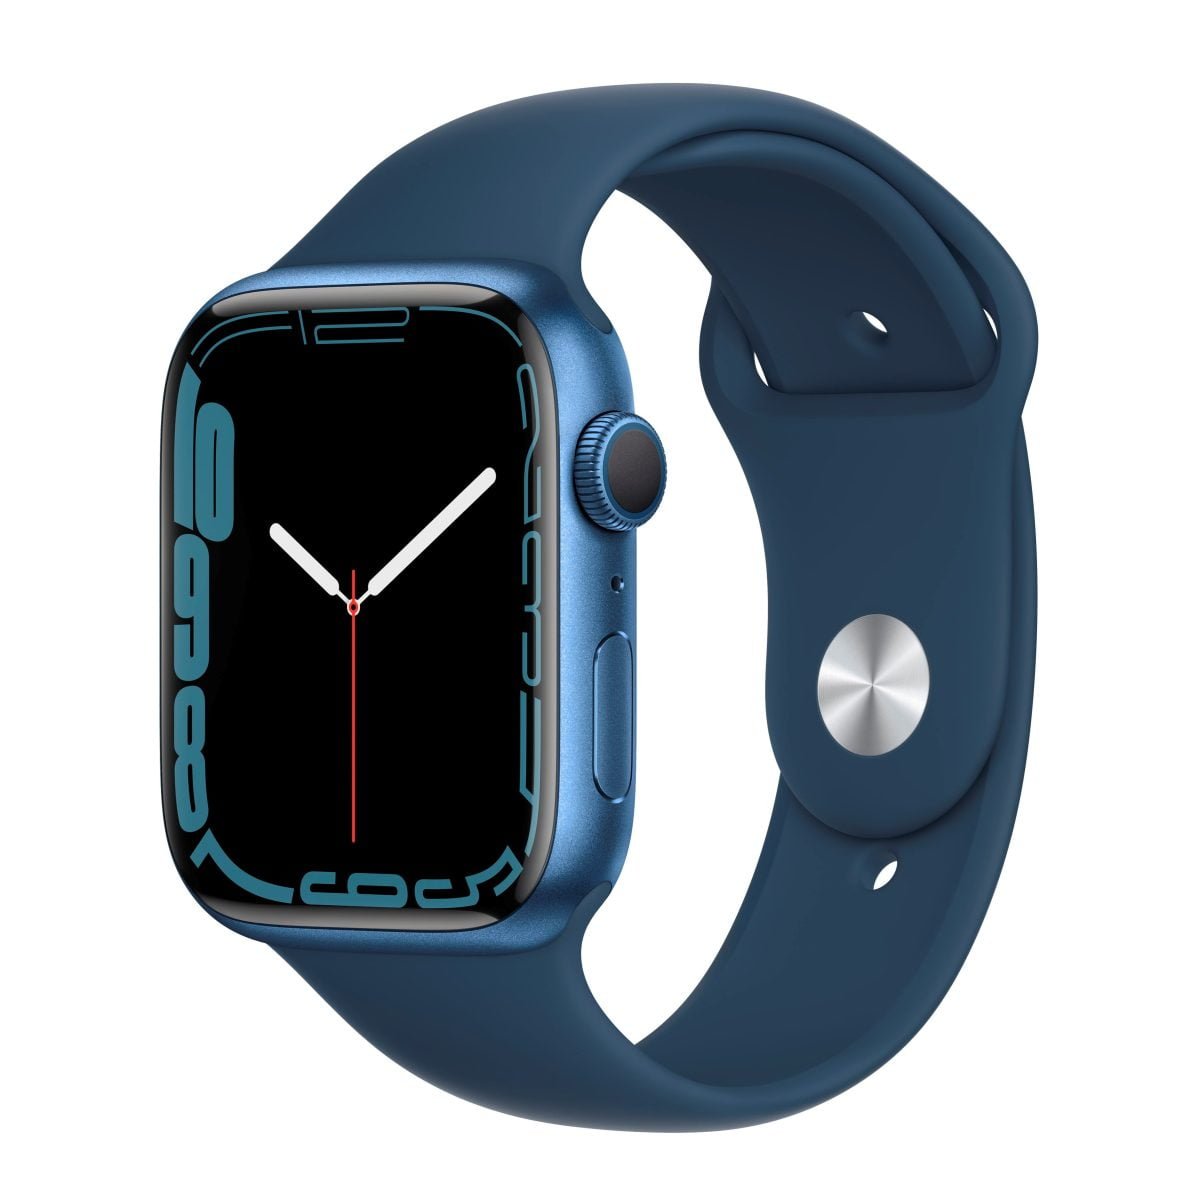 6215942 Sd Scaled Apple &Amp;Lt;H1 Class=&Amp;Quot;Heading-5 V-Fw-Regular&Amp;Quot;&Amp;Gt;Apple Watch Series 7 (Gps) 45Mm Blue Aluminum Case With Abyss Blue Sport Band - Blue&Amp;Lt;/H1&Amp;Gt; &Amp;Lt;H2&Amp;Gt;Model : Mkn83&Amp;Lt;/H2&Amp;Gt; Https://Www.youtube.com/Watch?V=Mmdq-Gwbnze &Amp;Lt;Div Class=&Amp;Quot;Long-Description-Container Body-Copy &Amp;Quot;&Amp;Gt; &Amp;Lt;Div Class=&Amp;Quot;Html-Fragment&Amp;Quot;&Amp;Gt; &Amp;Lt;Div&Amp;Gt; &Amp;Lt;Div&Amp;Gt;The Largest, Most Advanced Always-On Retina Display Yet Makes Everything You Do With Your Apple Watch Series 7 Bigger And Better. Series 7 Is The Most Durable Apple Watch Ever Built, With An Even More Crack-Resistant Front Crystal. Advanced Features Let You Measure Your Blood Oxygen Level,¹ Take An Ecg Anytime, And Access Mindfulness And Sleep Tracking Apps. You Can Also Track Dozens Of Workouts, Including New Tai Chi And Pilates.&Amp;Lt;/Div&Amp;Gt; &Amp;Lt;/Div&Amp;Gt; &Amp;Lt;/Div&Amp;Gt; &Amp;Lt;/Div&Amp;Gt; Apple Watch Apple Watch Series 7 (Gps) 45Mm - Blue